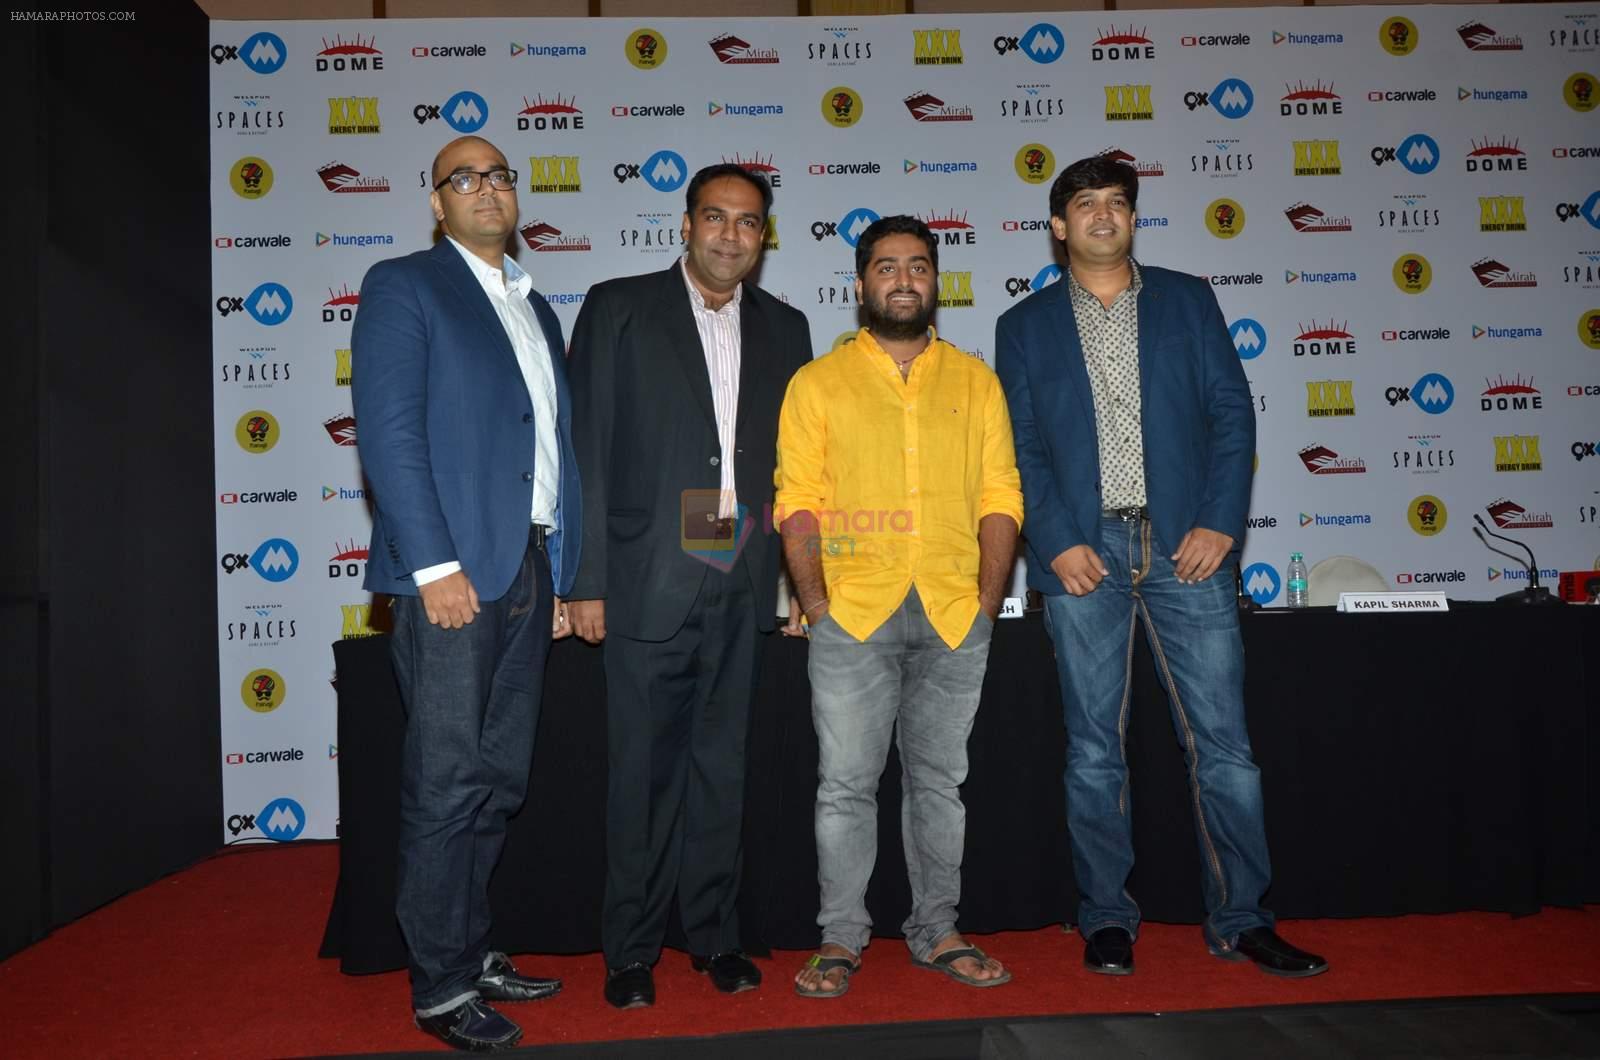 Arijit Singh at 9xm dome concert press meet in The Club on 1st July 2015